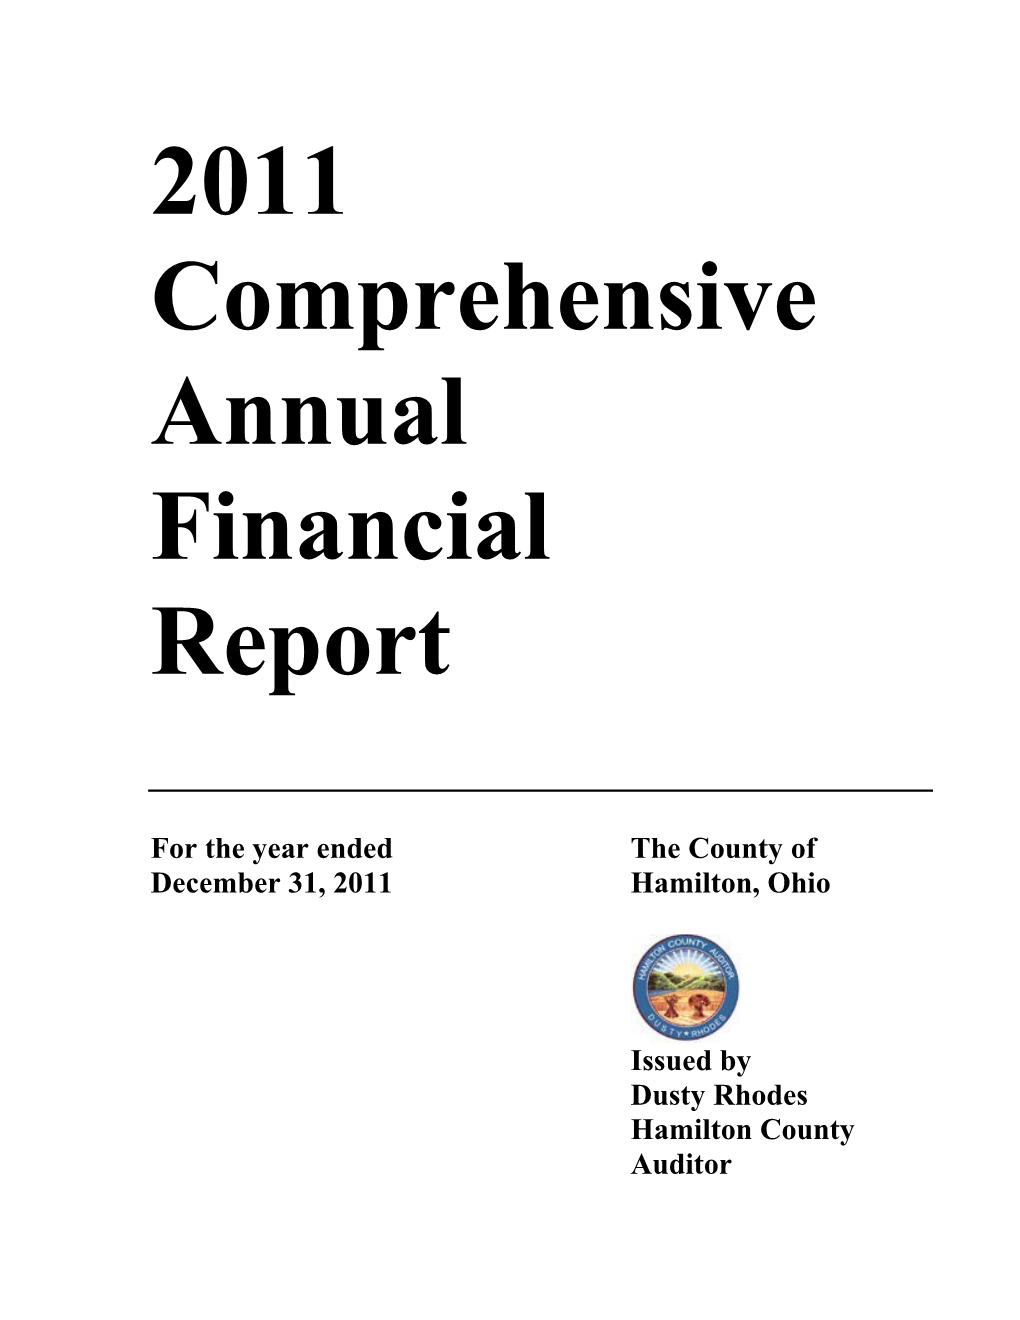 2011 Comprehensive Annual Financial Report (CAFR)